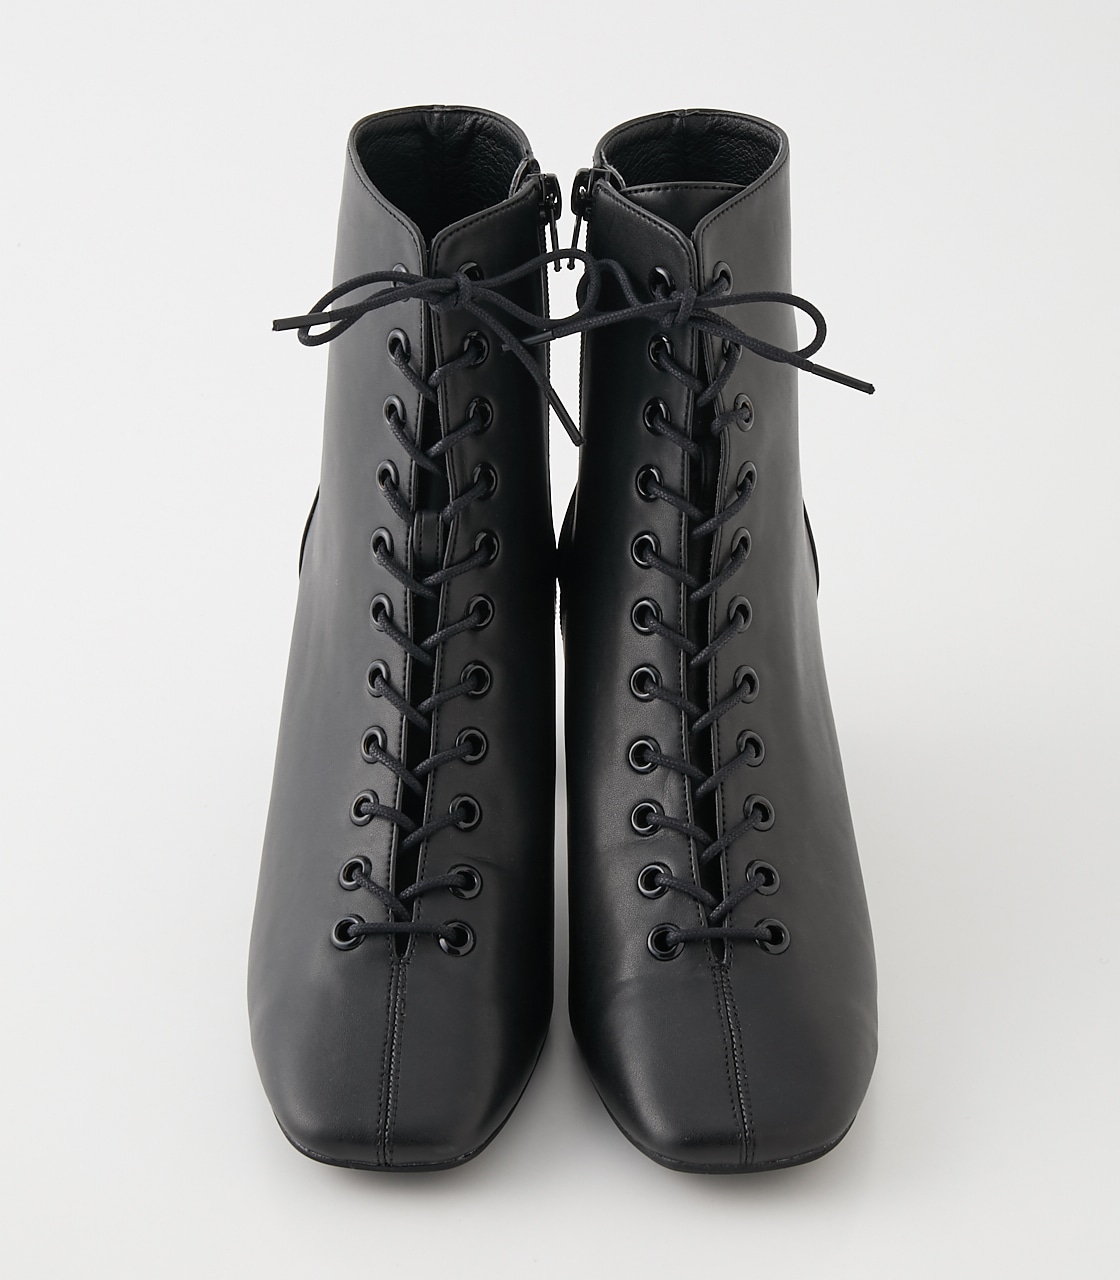 SQUARE TOE LACE UP BOOTS/スクエアトゥレースアップブーツ 詳細画像 BLK 3